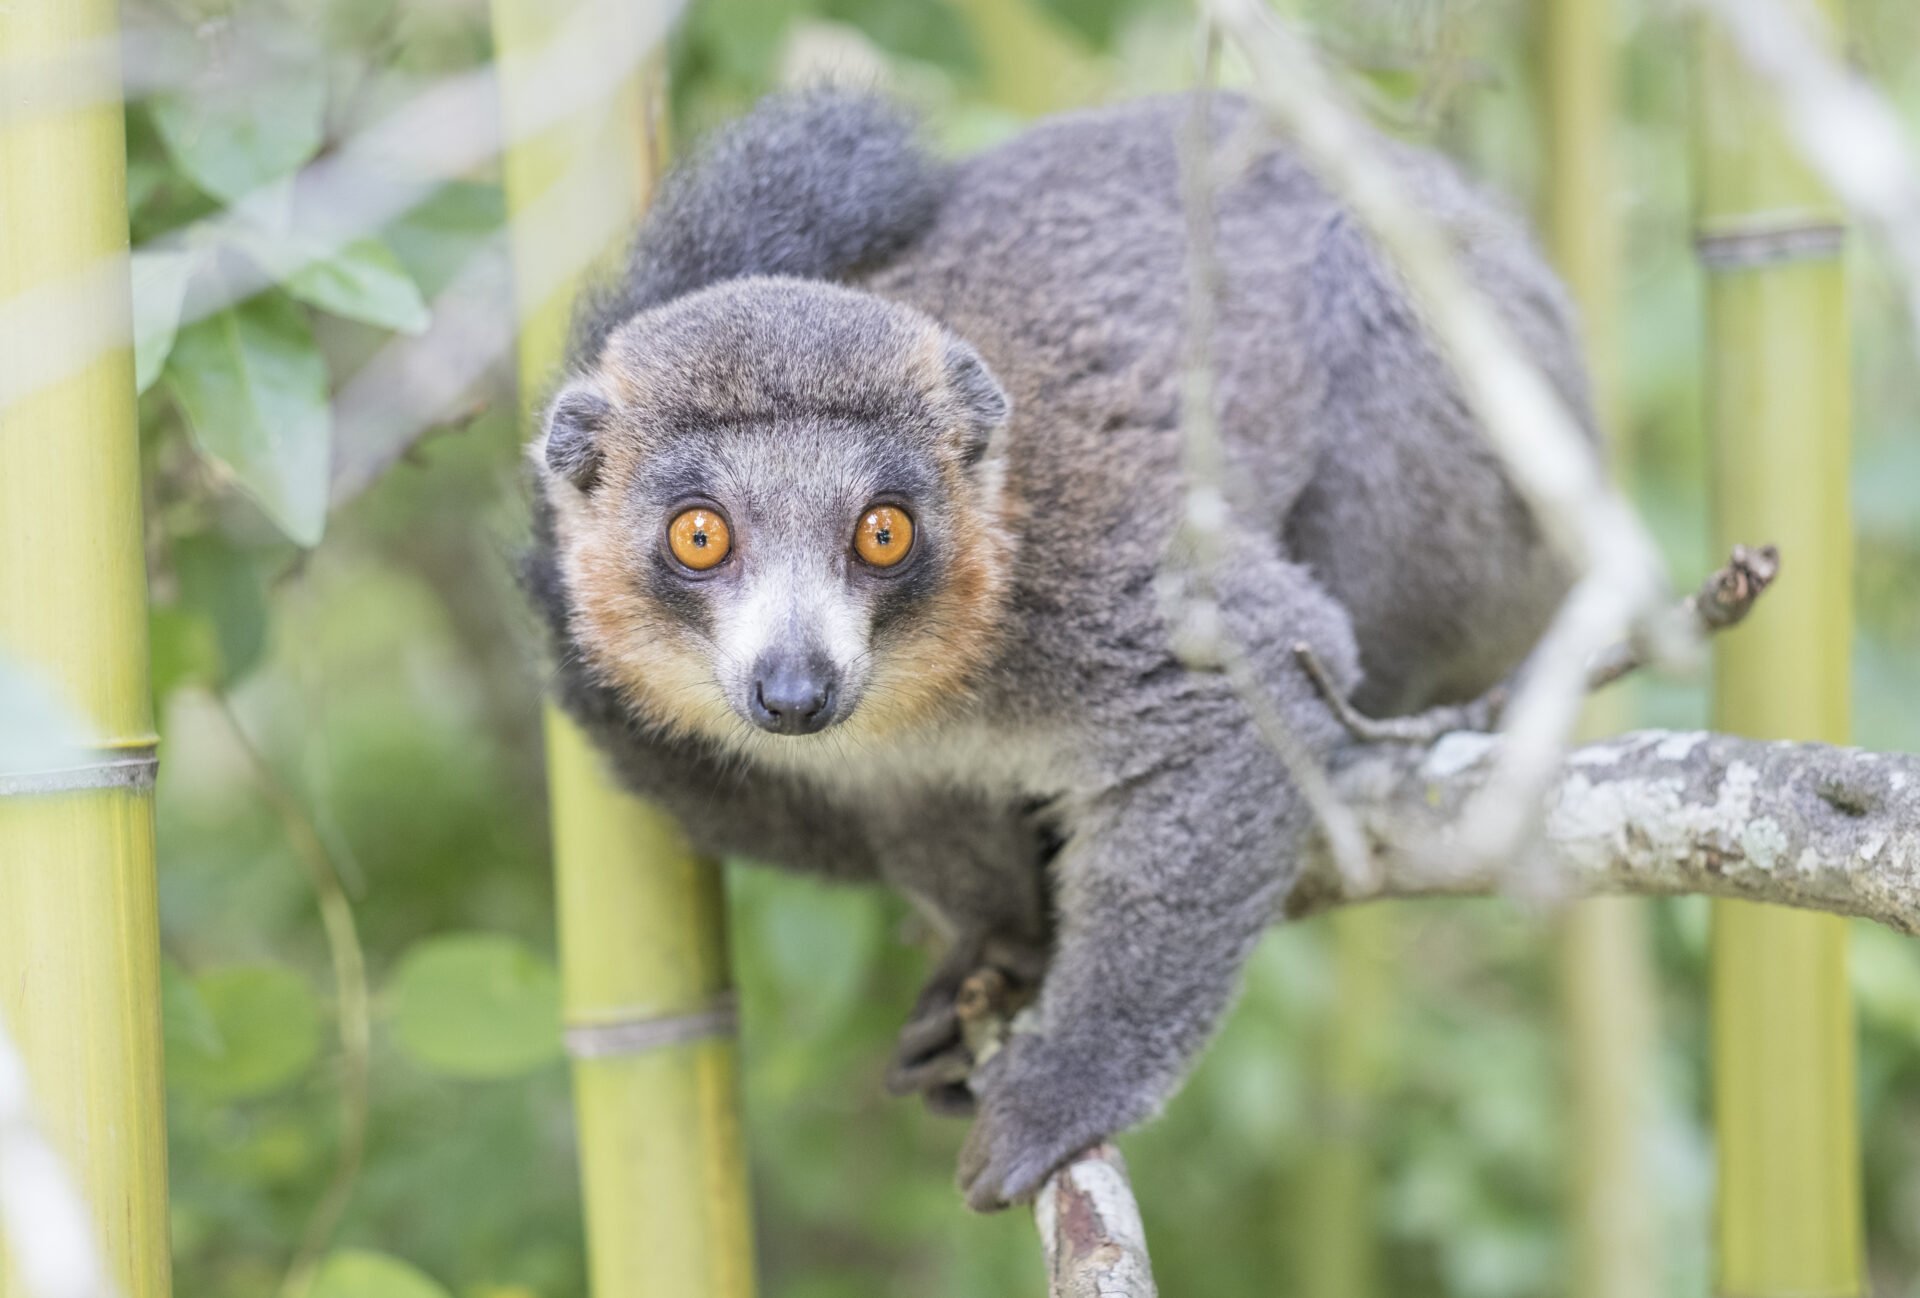 Male mongoose lemur looking directly at the camera against a background of bamboo. Photo by Sara Clark.